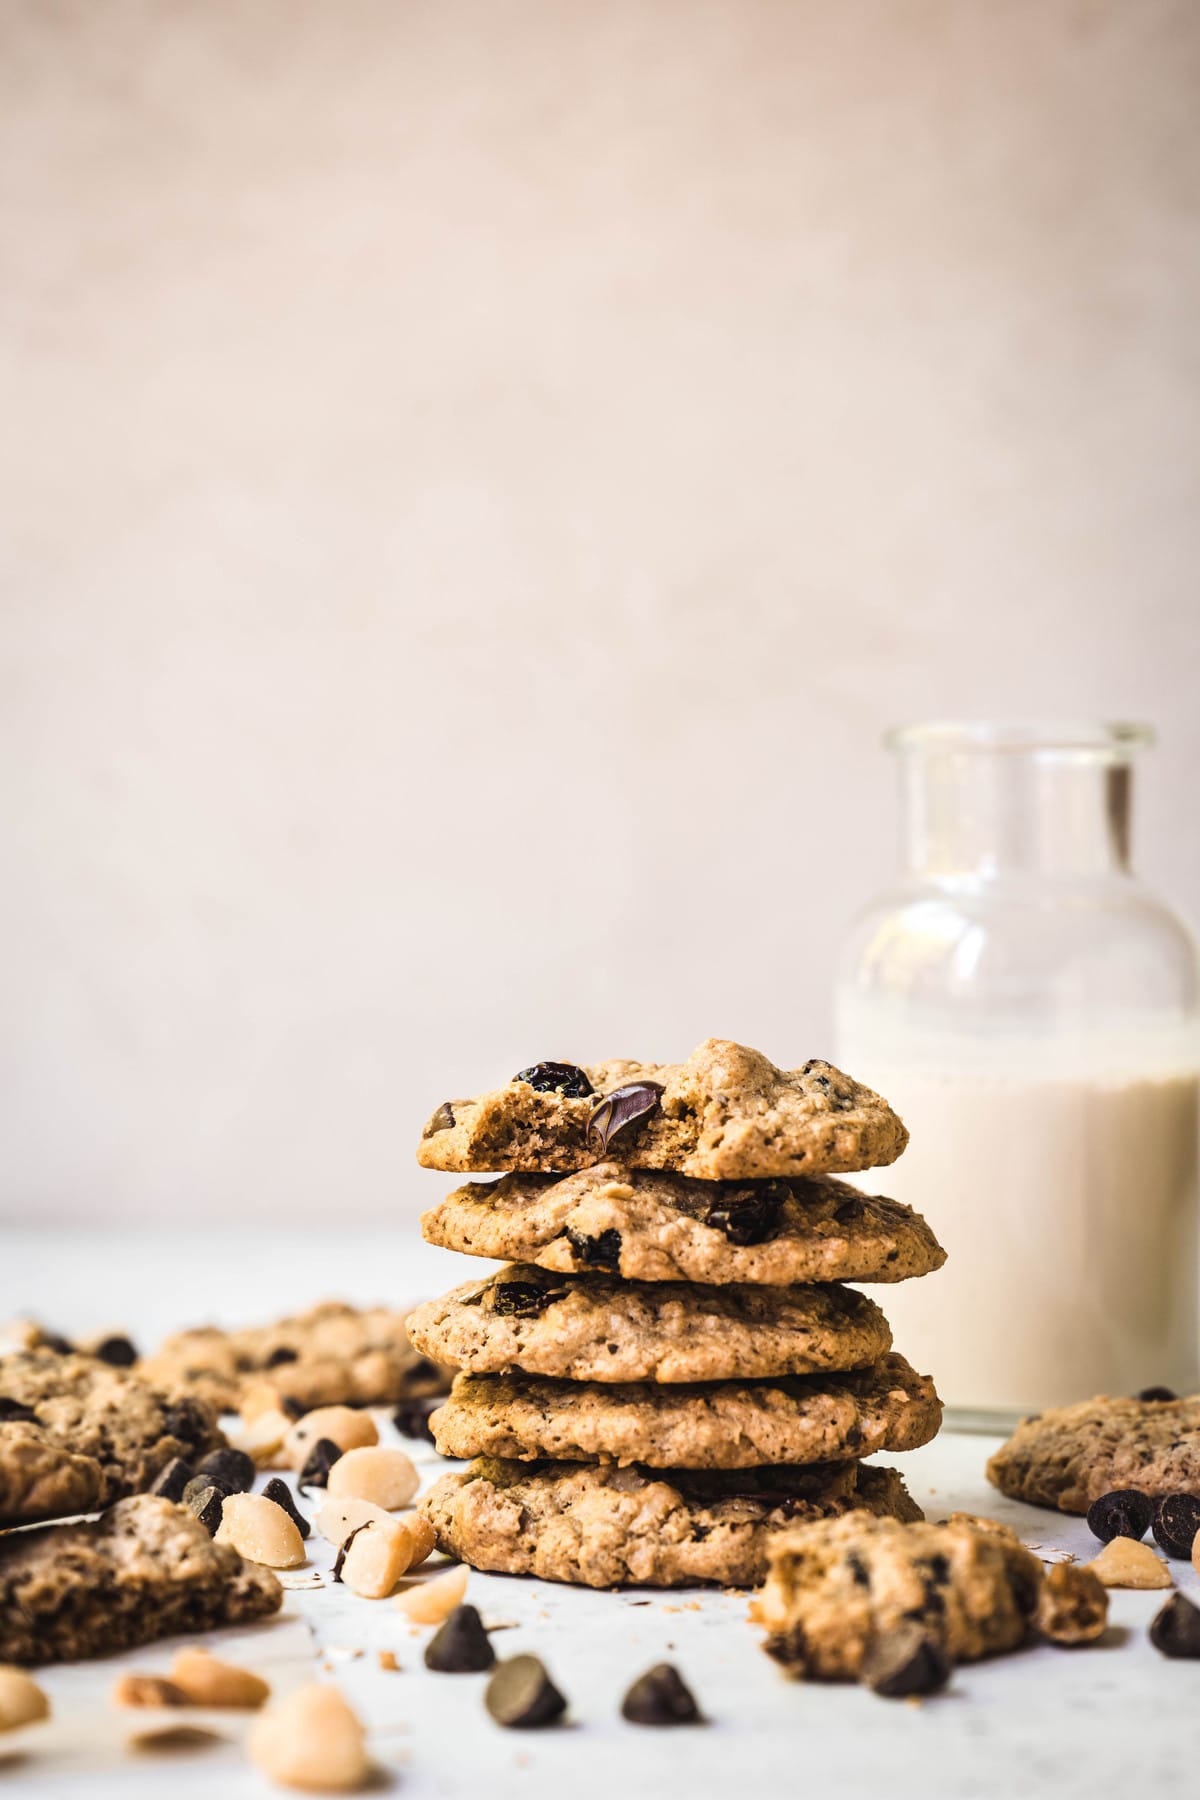 Side view of stack of chocolate chip cherry cookies with macadamia nuts with milk in background